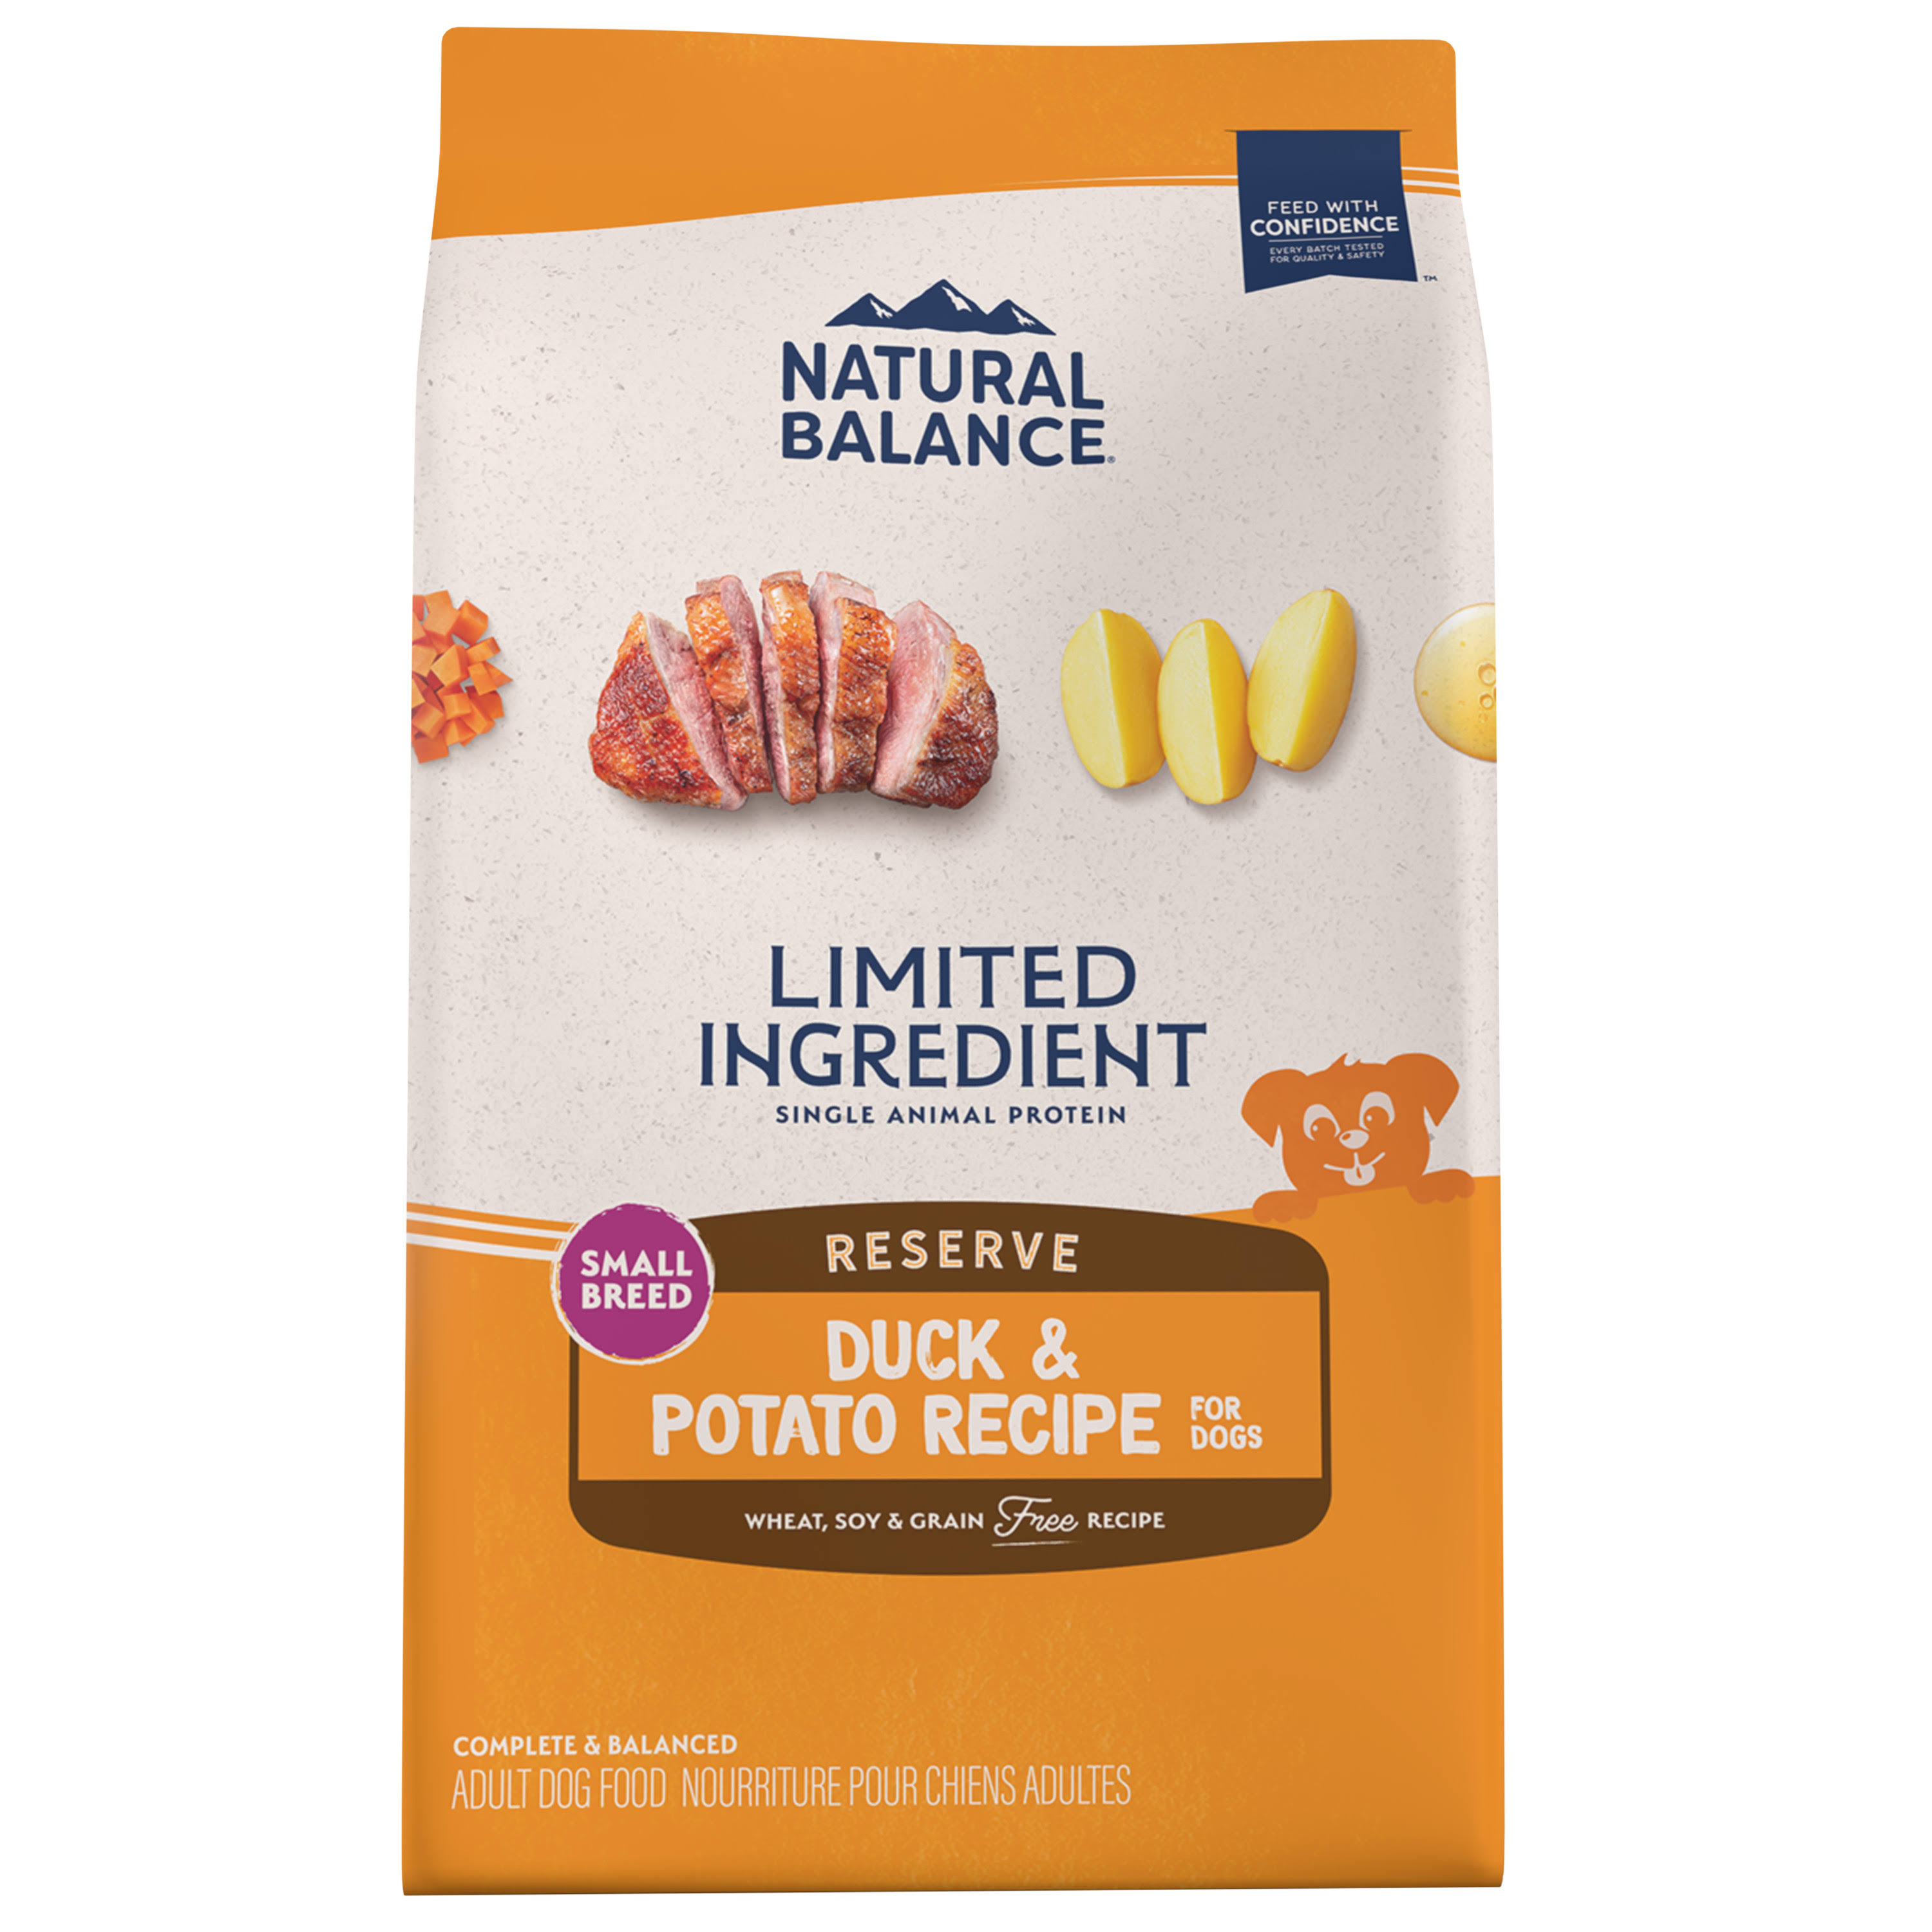 Natural Balance L.I.D. Limited Ingredient Diets Grain Free Duck & Potato Formula Small Breed Bites Adult Dry Dog Food